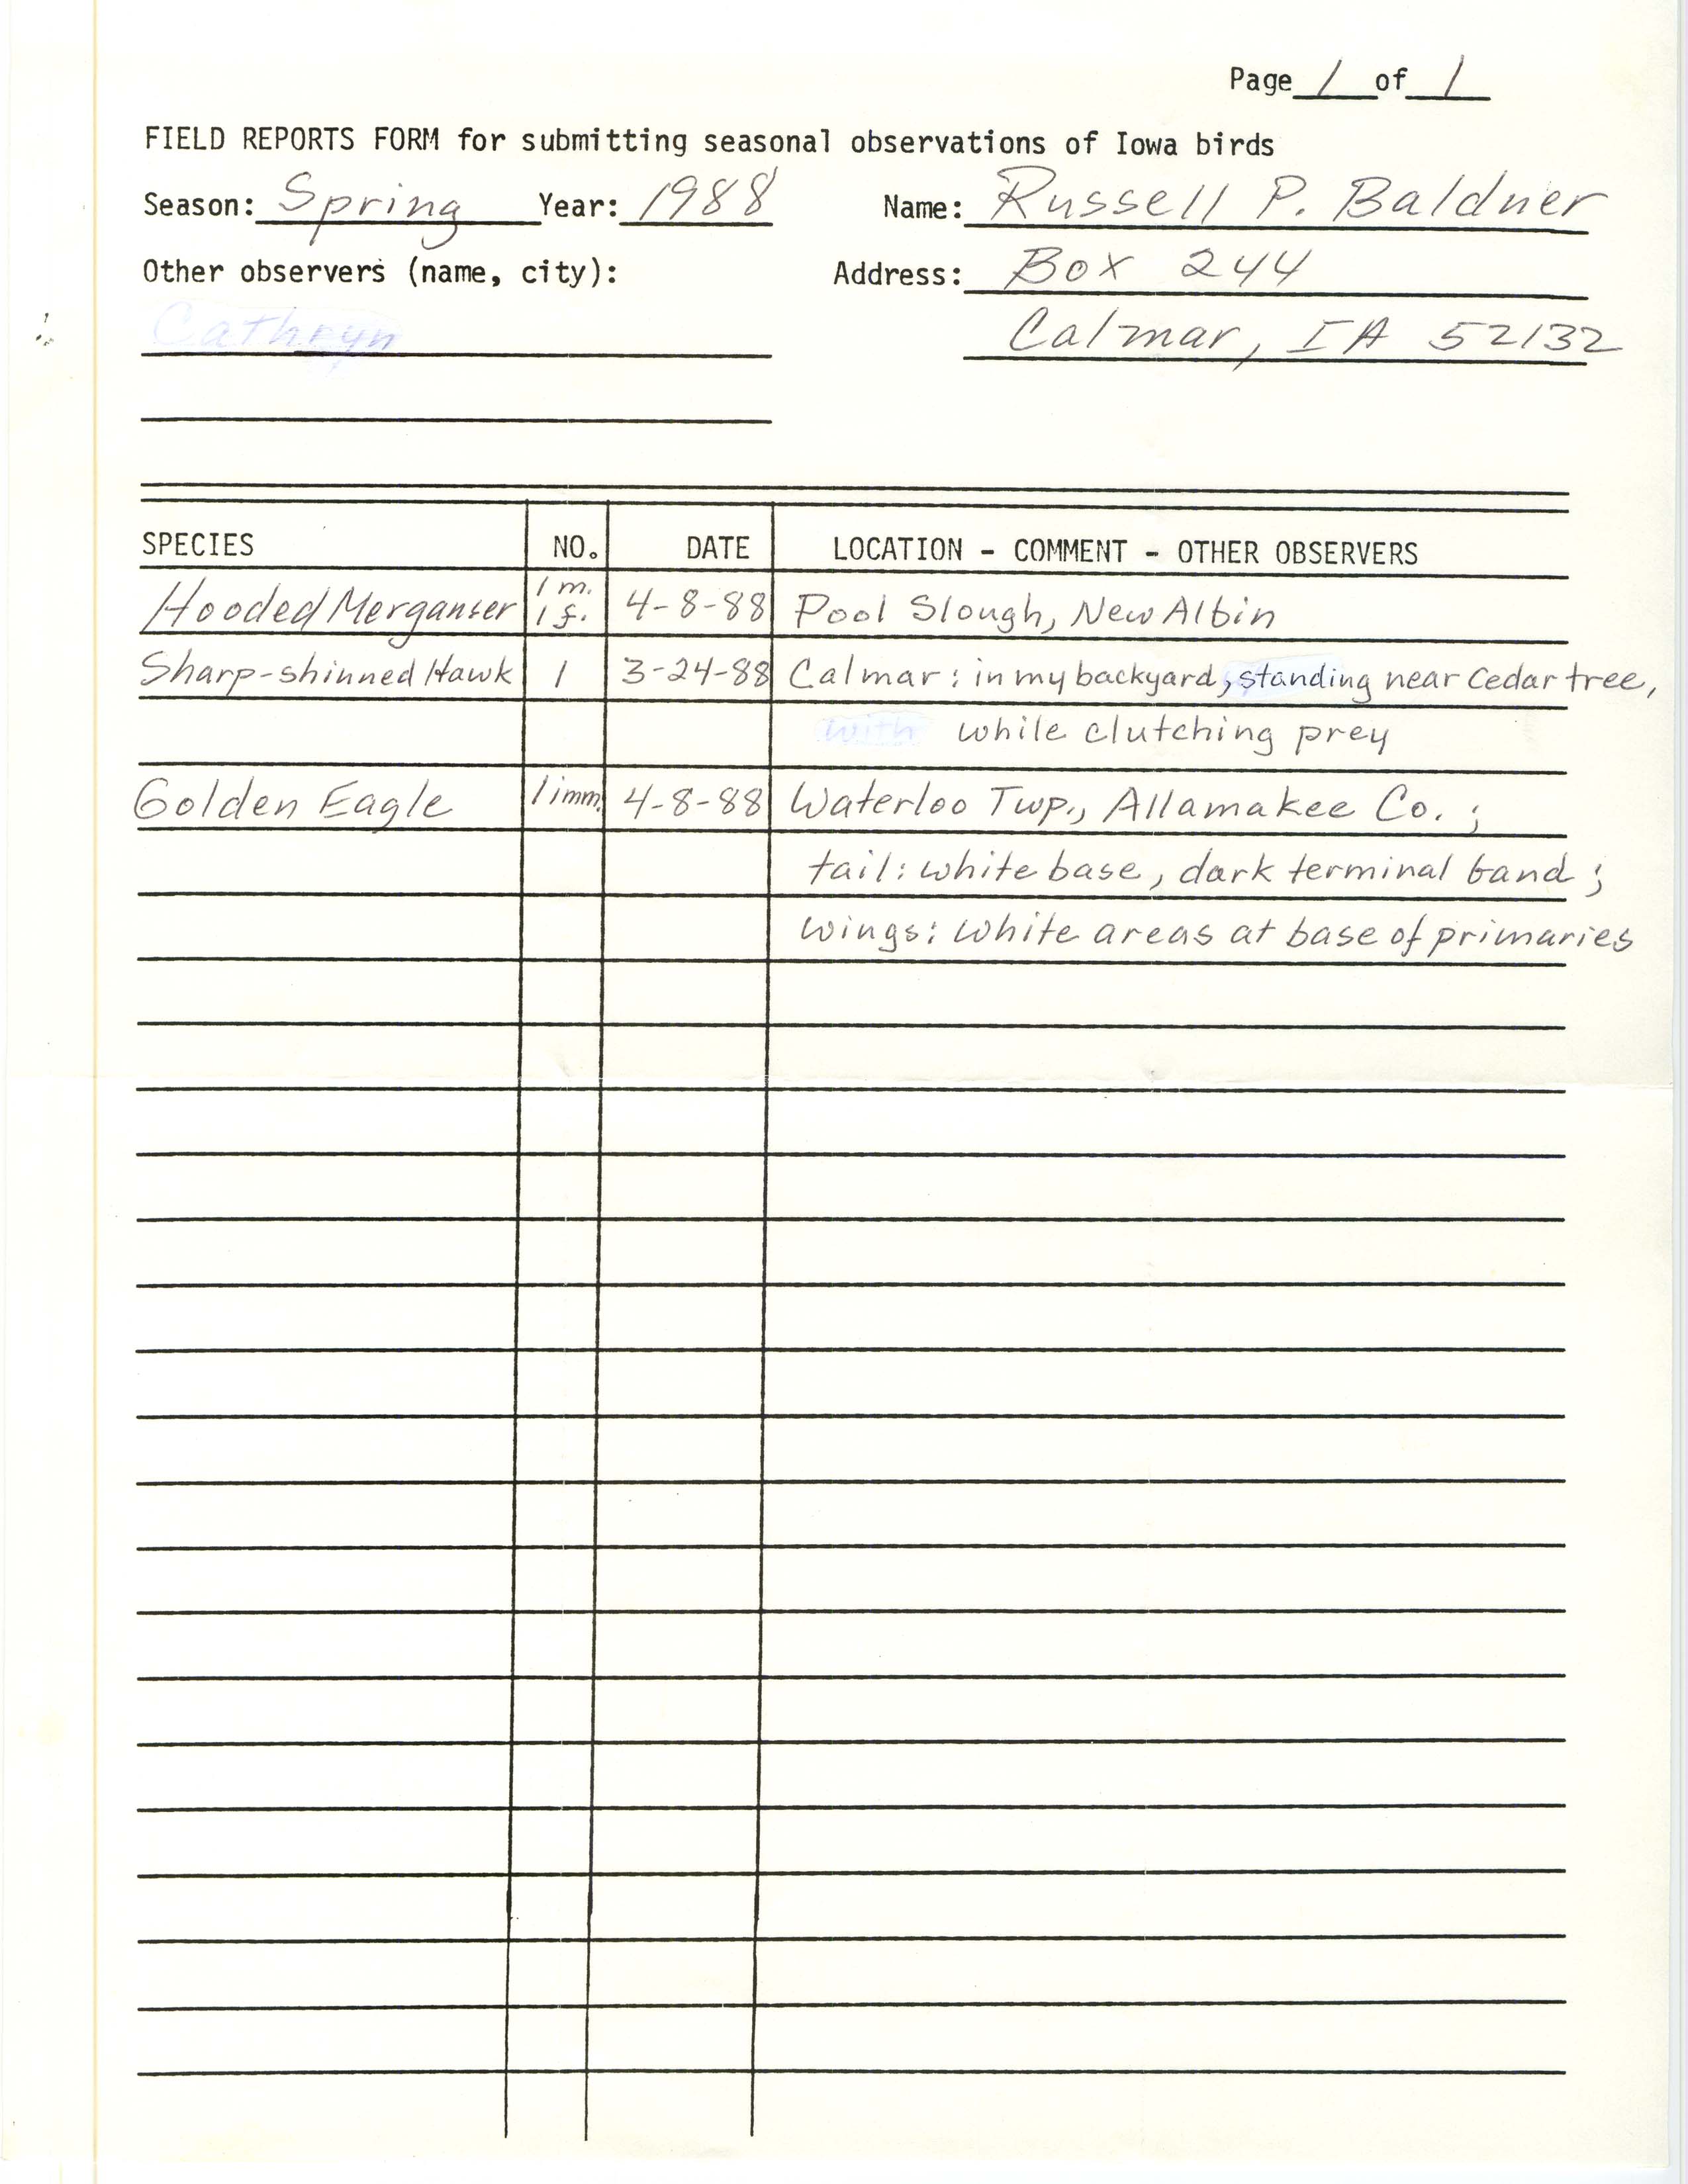 Field reports form for submitting seasonal observations of Iowa birds, Russell P. Baldner, spring 1988